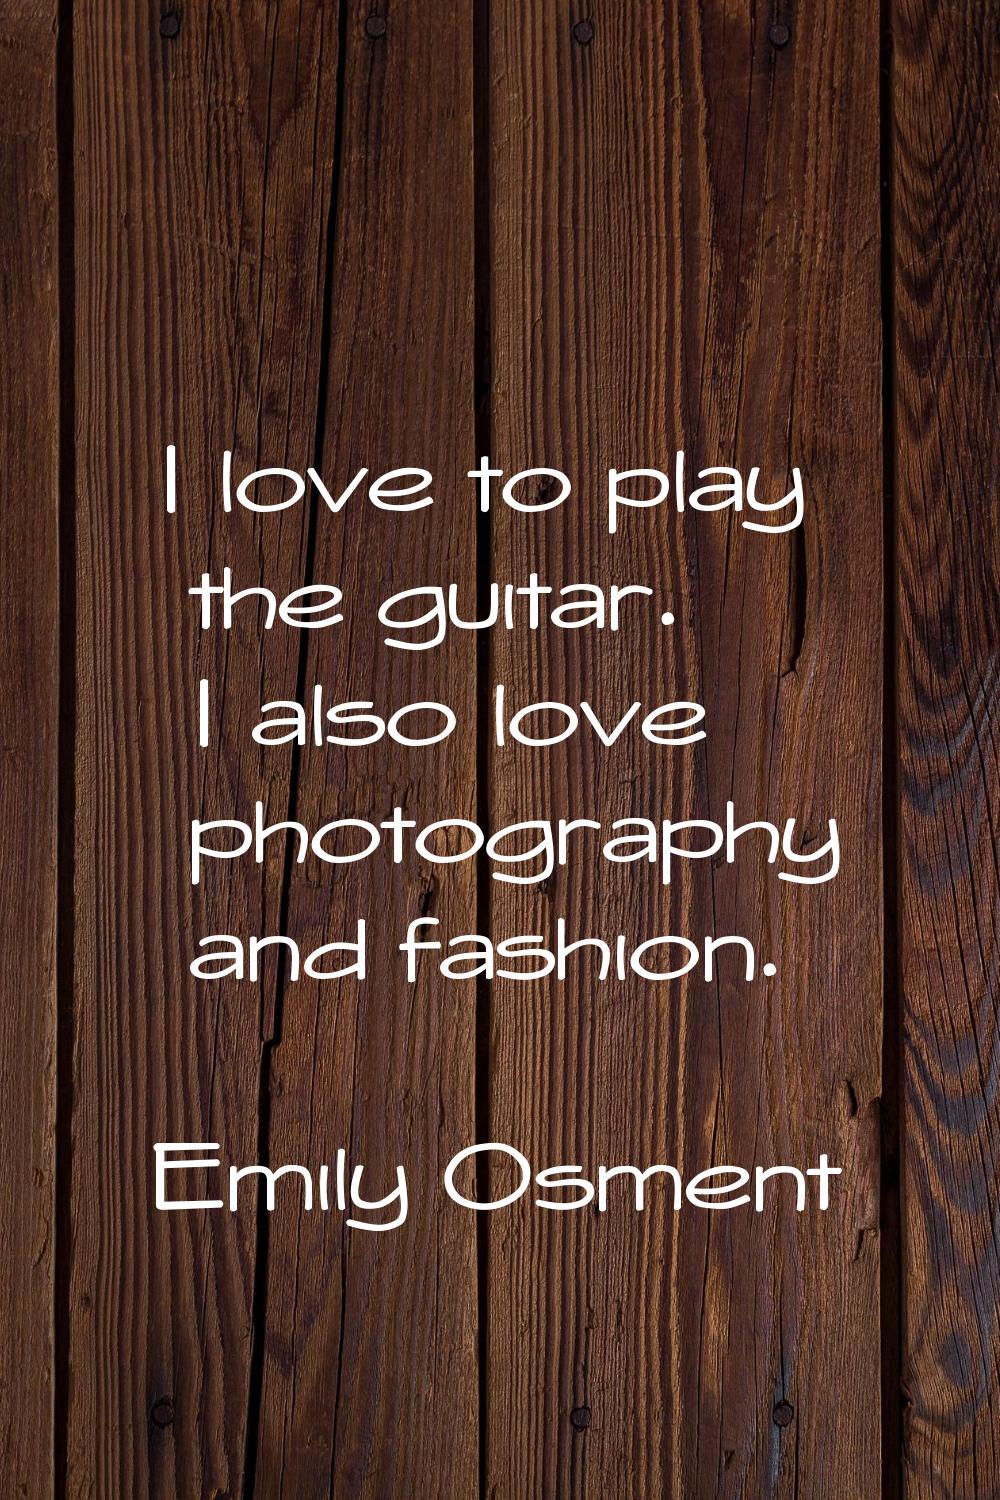 I love to play the guitar. I also love photography and fashion.